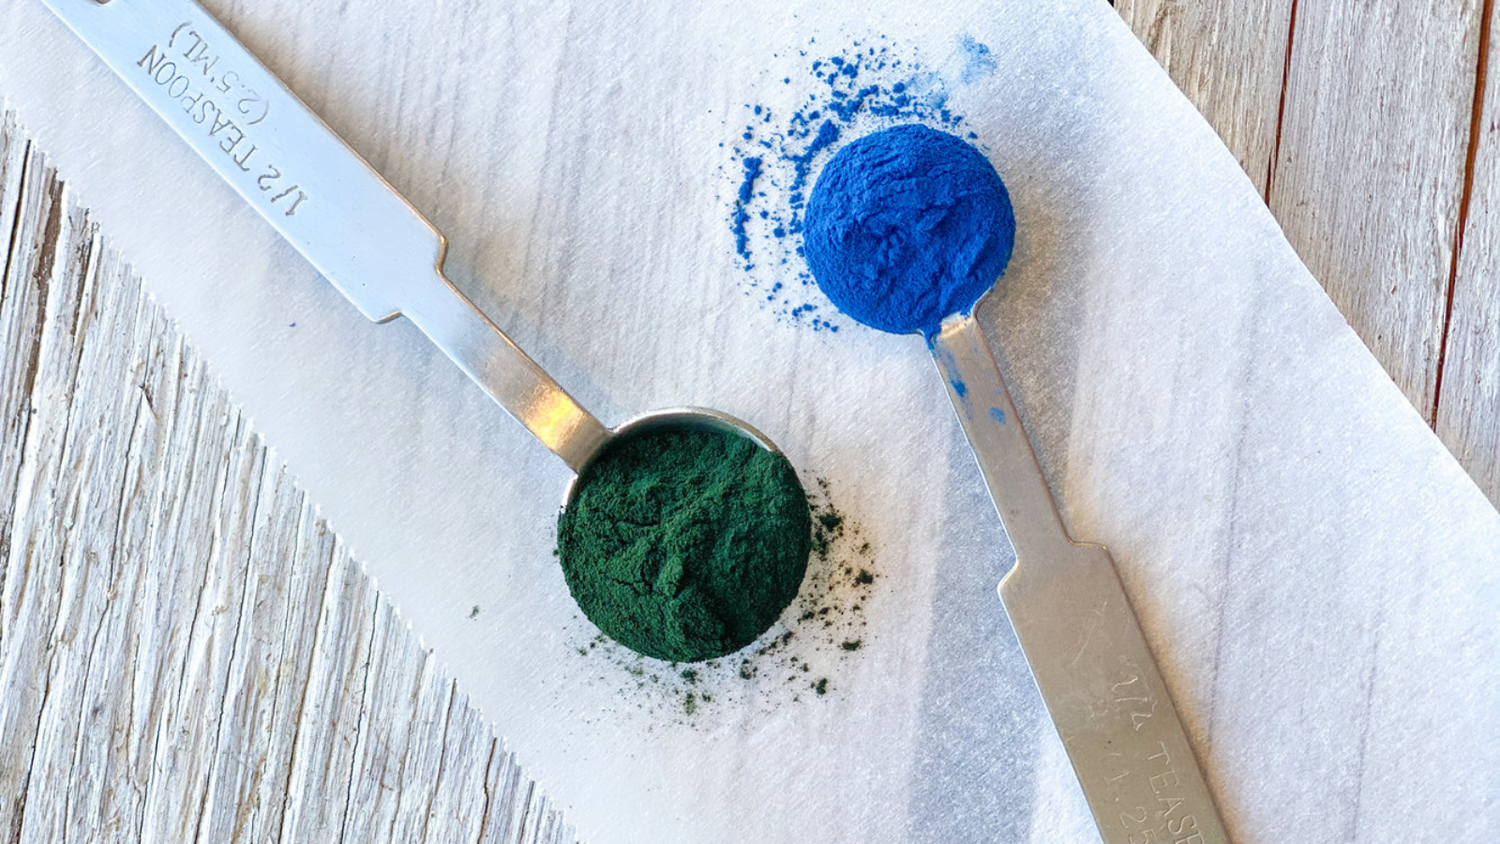 Superfood Highlight: Spirulina and BlueMAJIK - What's the Difference? + Health Benefits